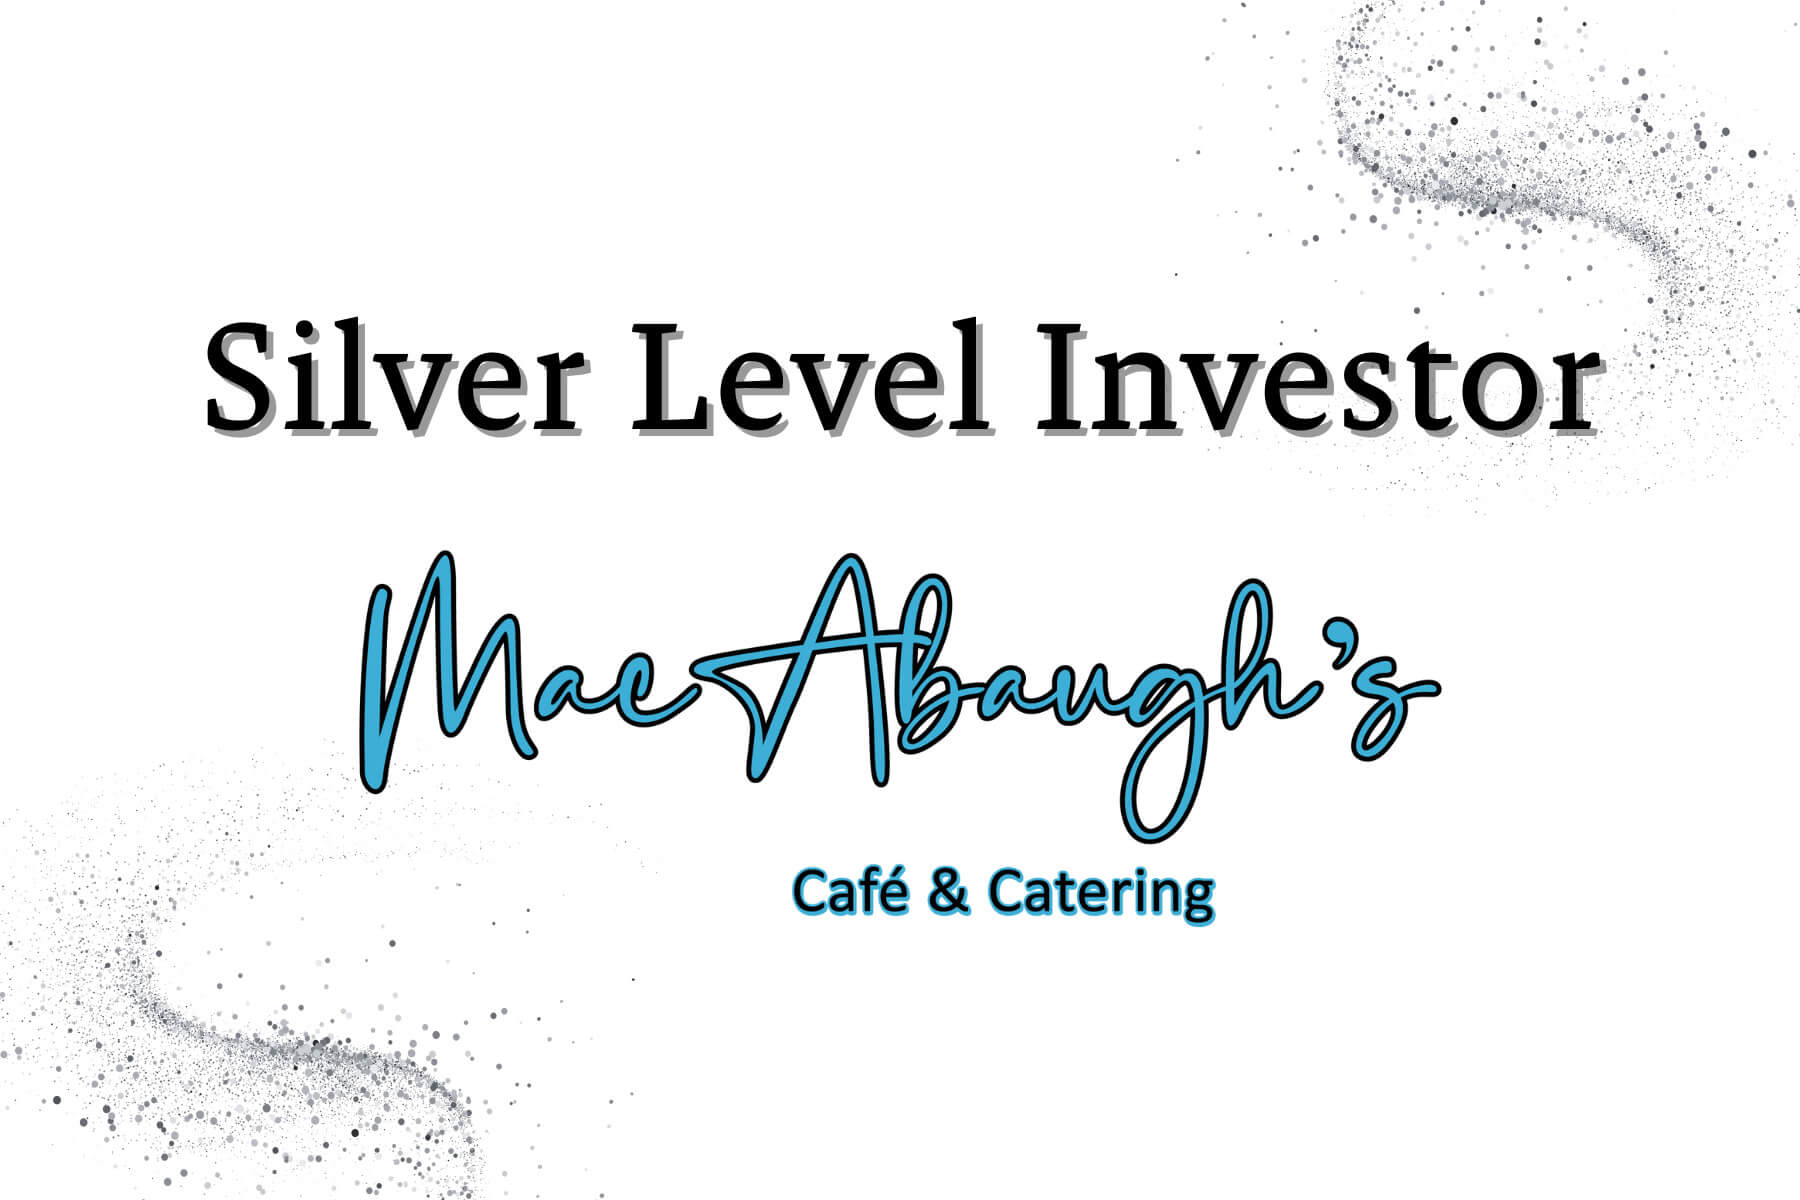 MacAbaugh's Care & Catering